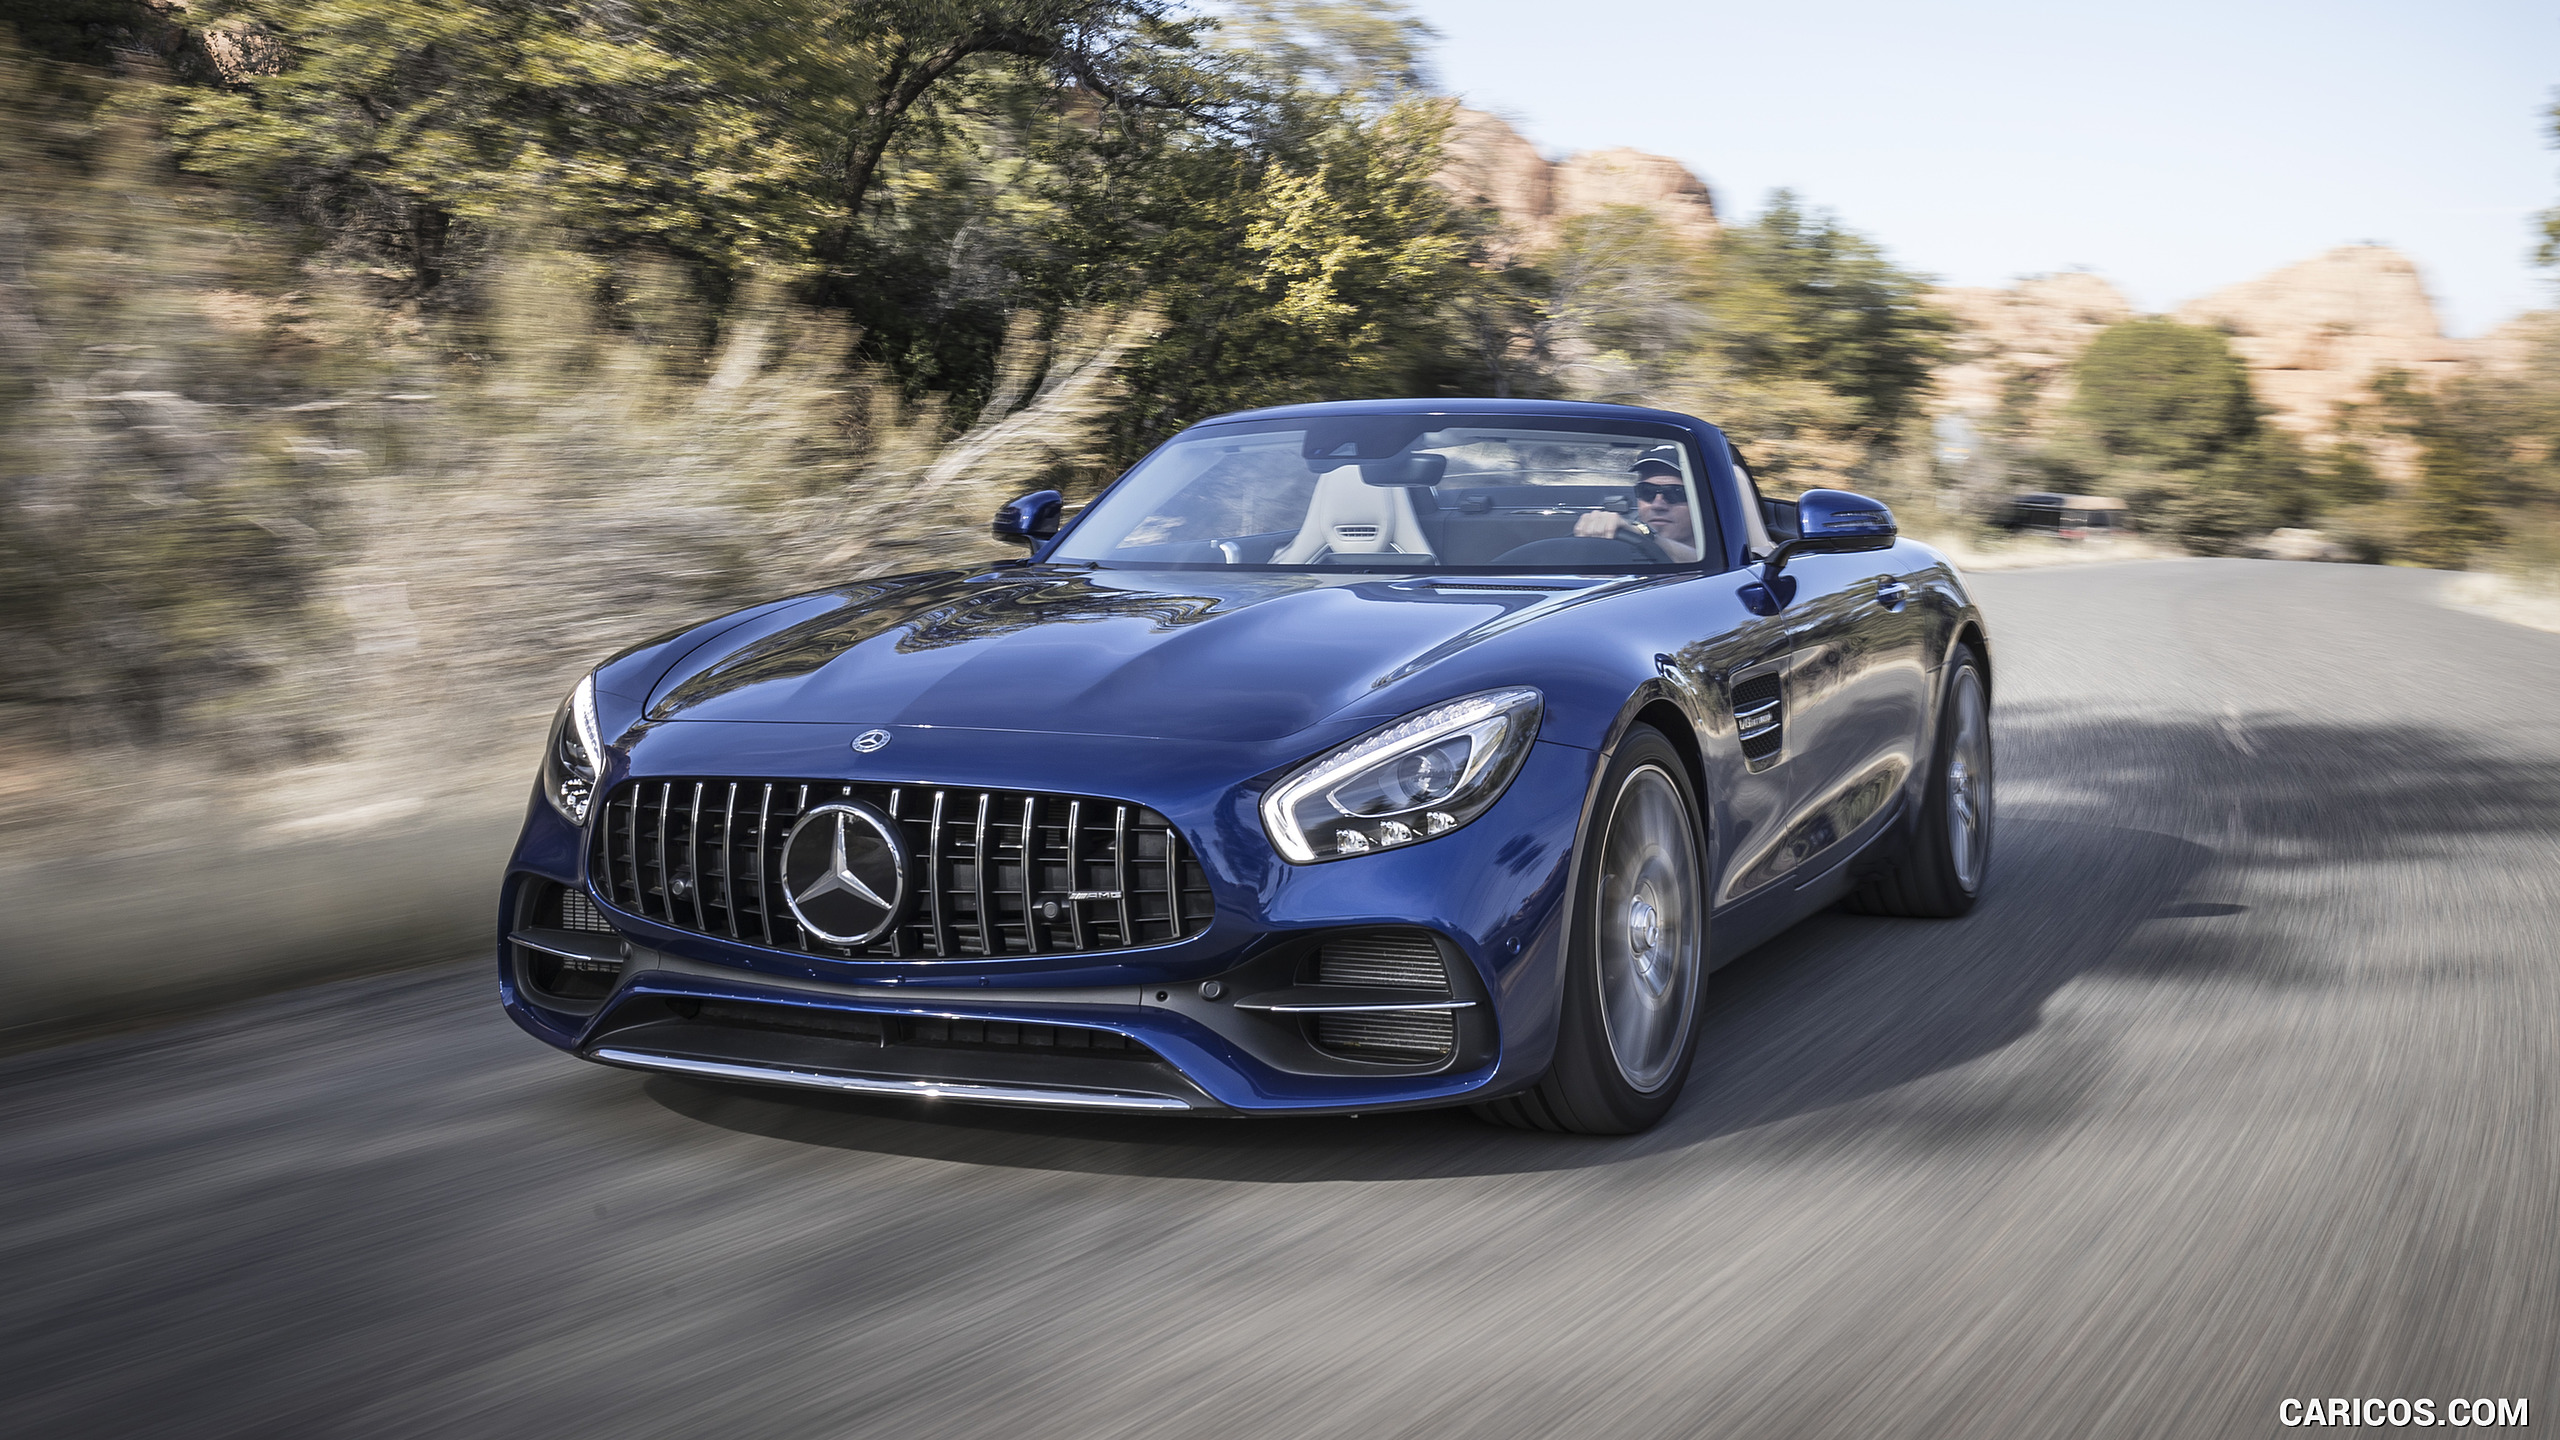 2018 Mercedes-AMG GT Roadster - Front Three-Quarter, #132 of 350